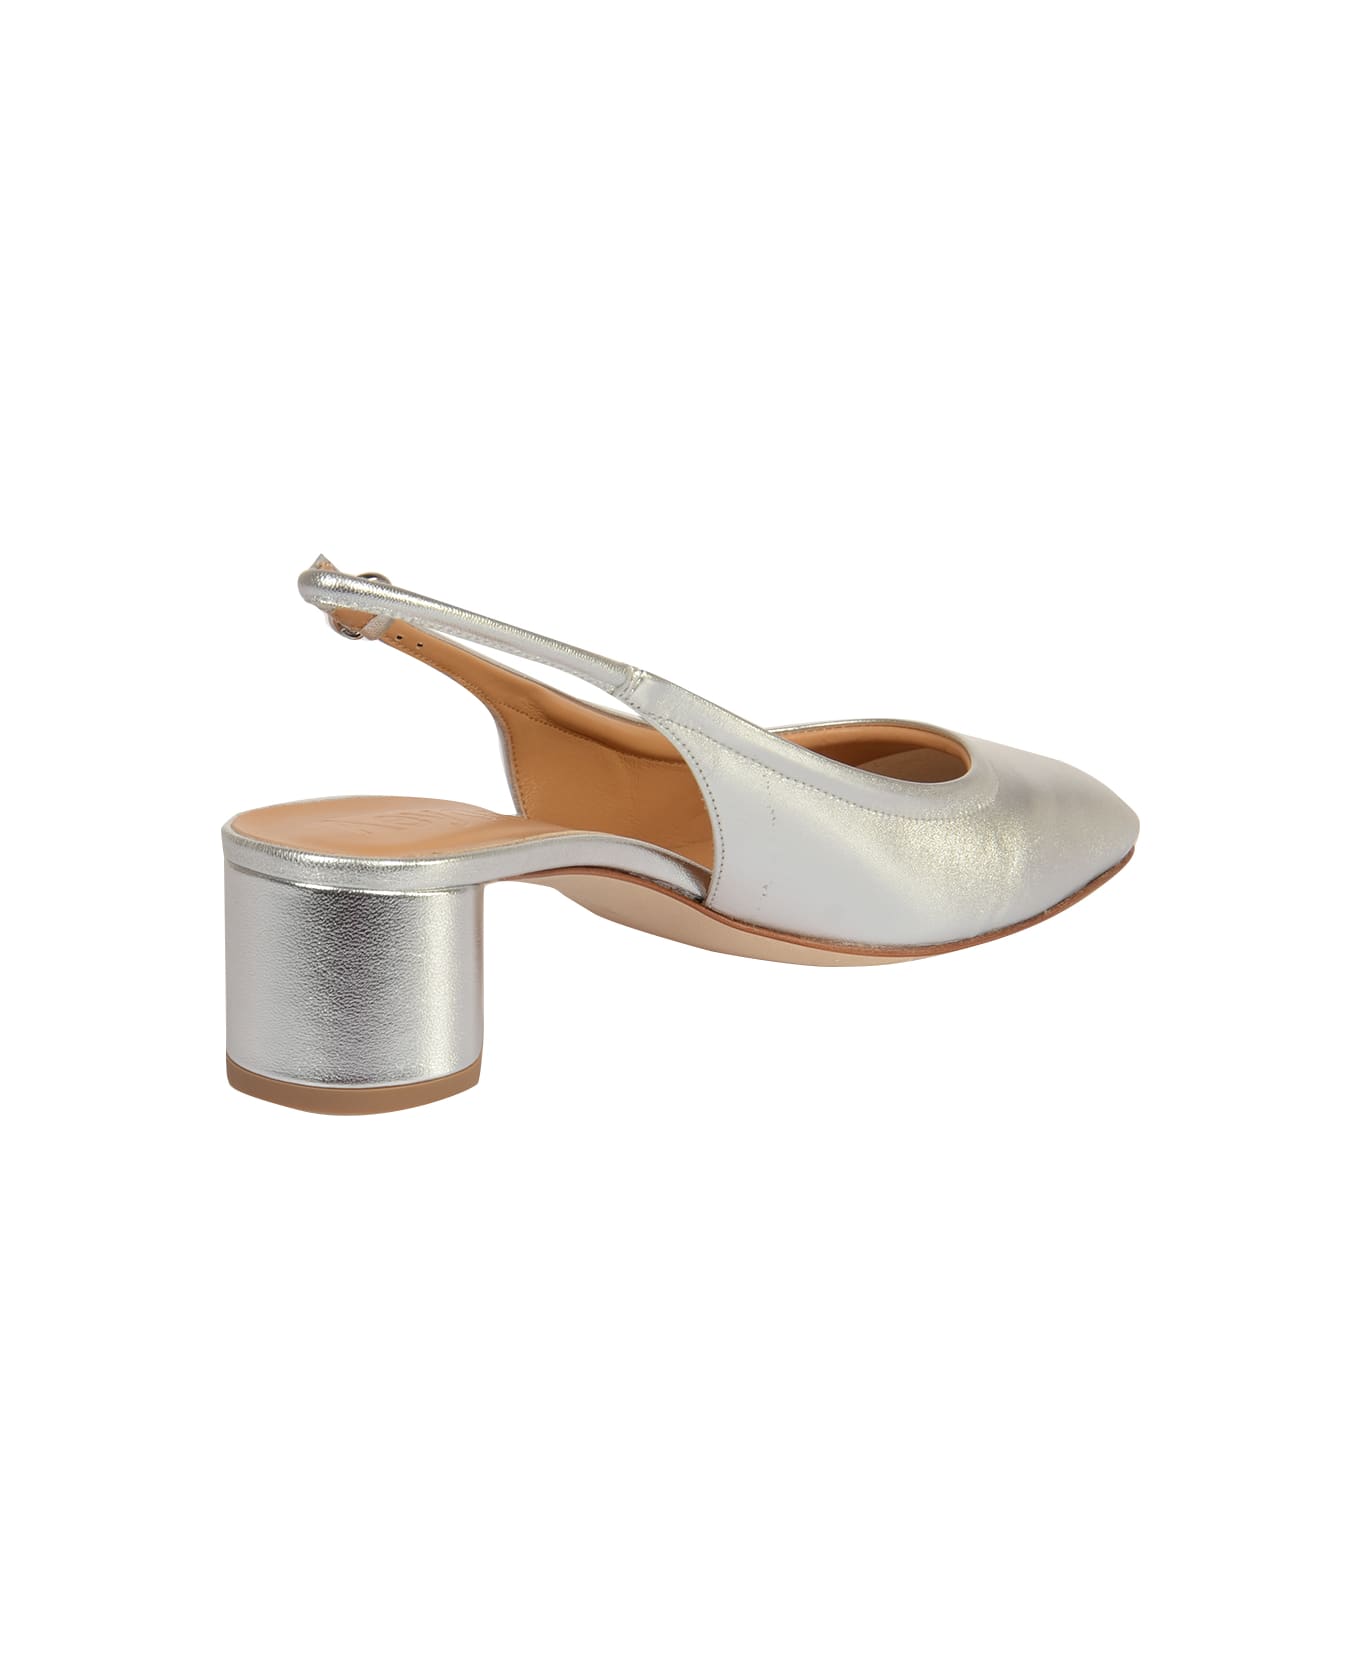 aeyde Romy Laminated Sandals - Silver